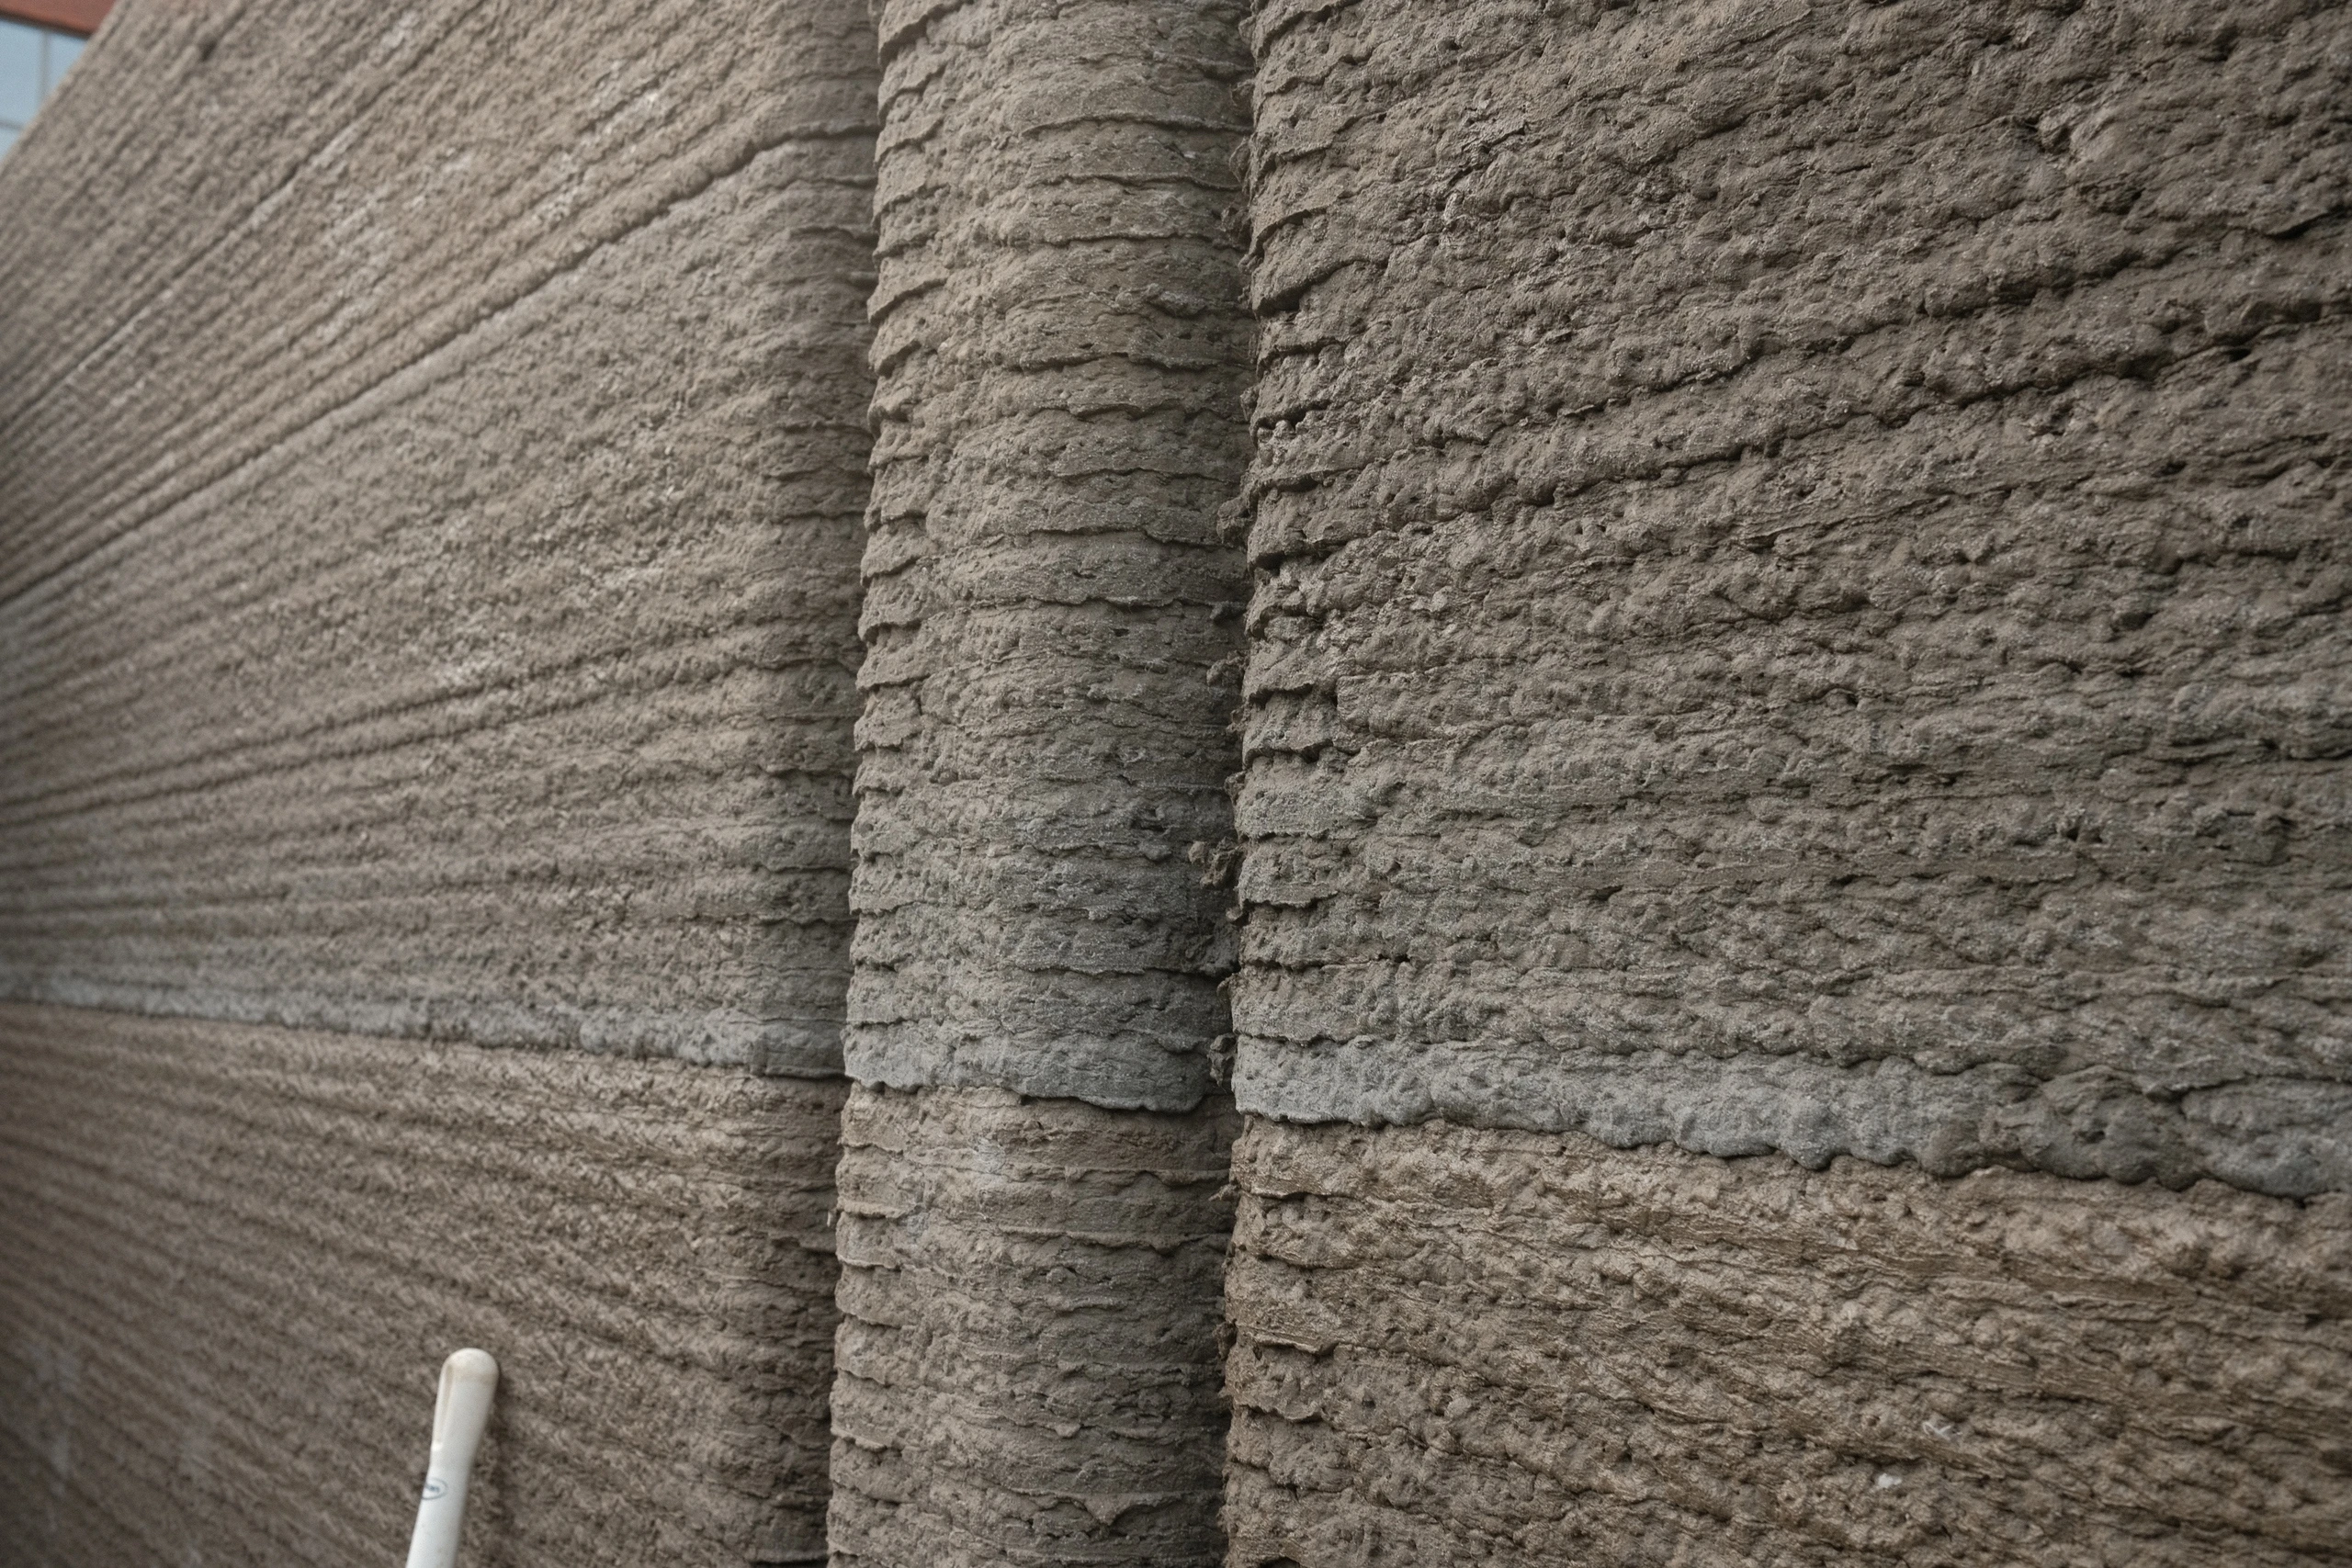 Image of close up of 3D-printed concrete layers